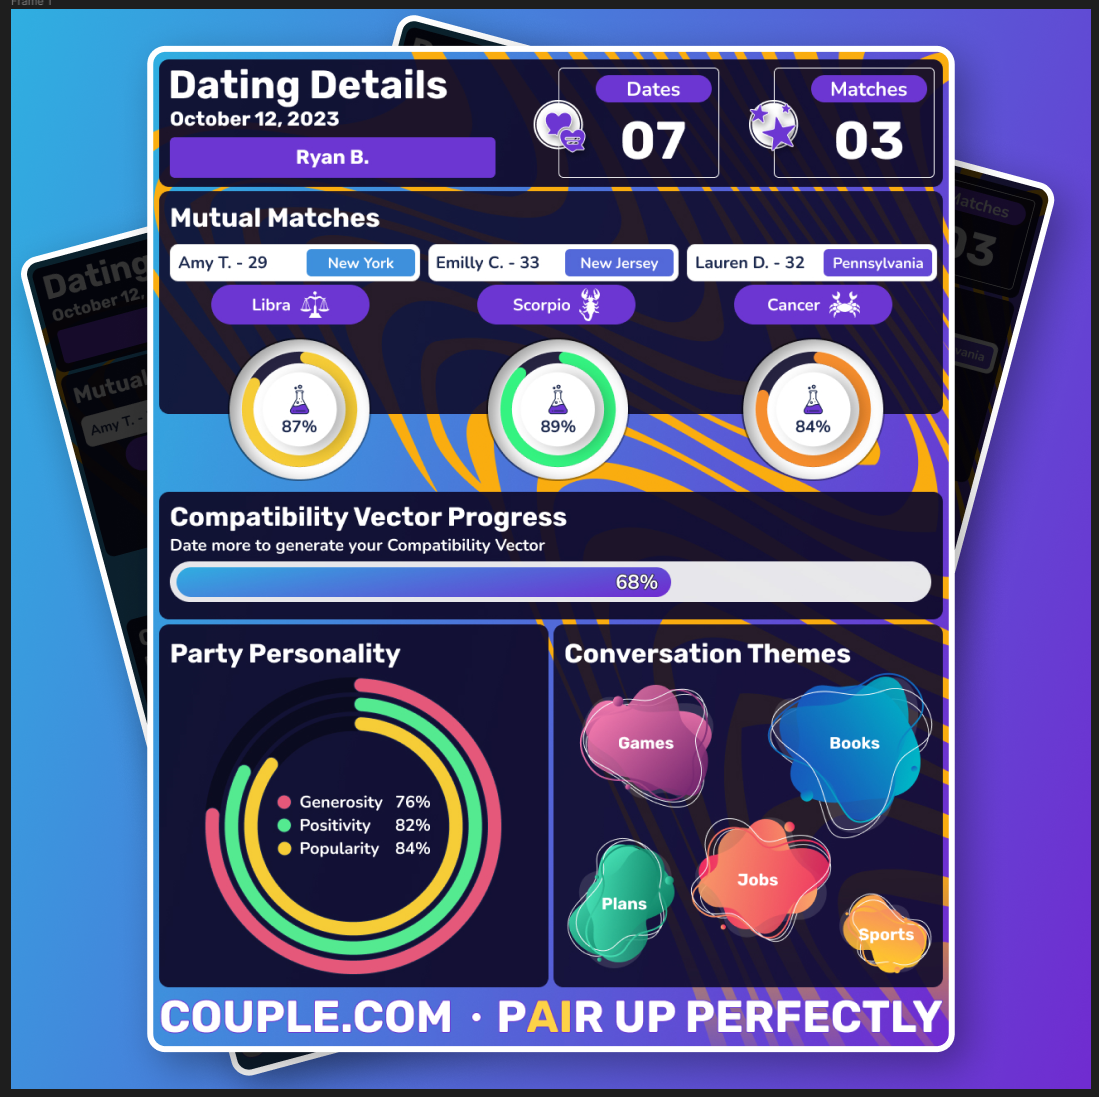 Image of Couple.com's Dating Details card. The card displays data from a user's online dating event: number of dates, number of matches, who those matches are, how close the user is to completing their Compatibility Vector, their "party personality" (a measure of their generosity, positivity, and popularity), and the five themes they discussed most on their dates.